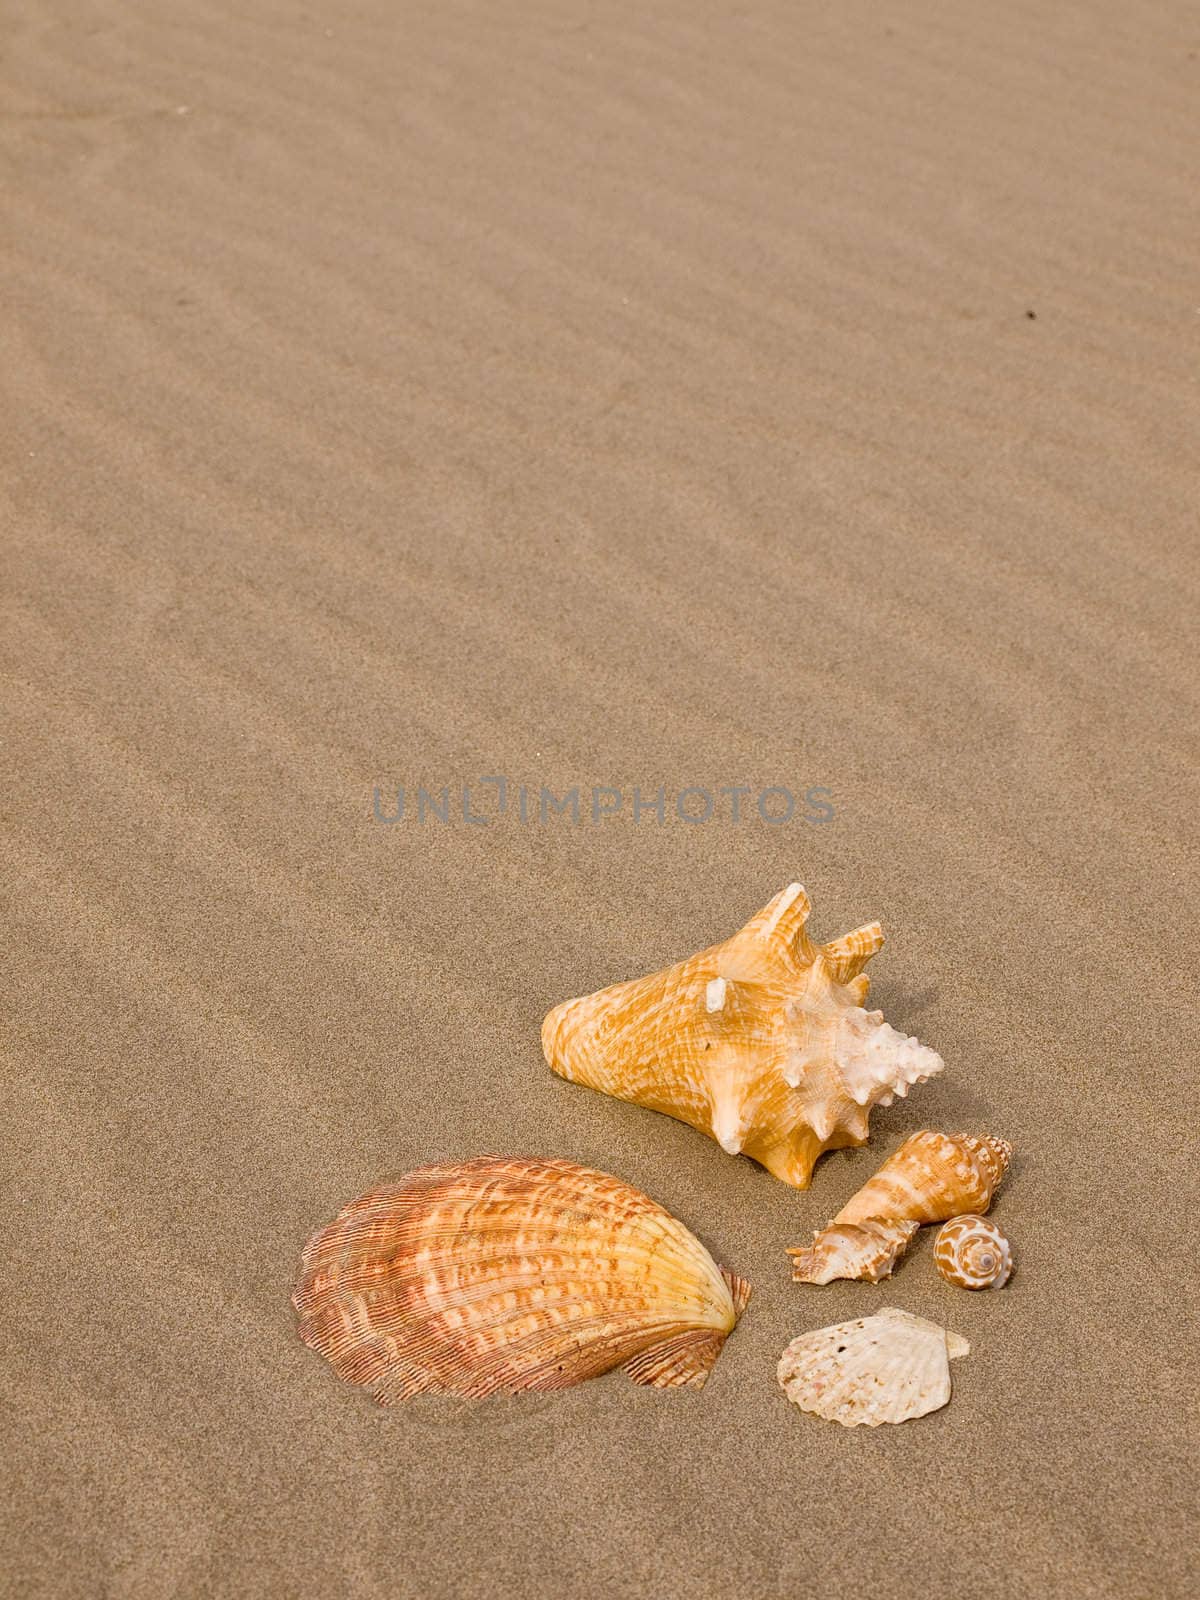 Scallop and Conch Shells on a Wind Swept Sandy Beach by Frankljunior